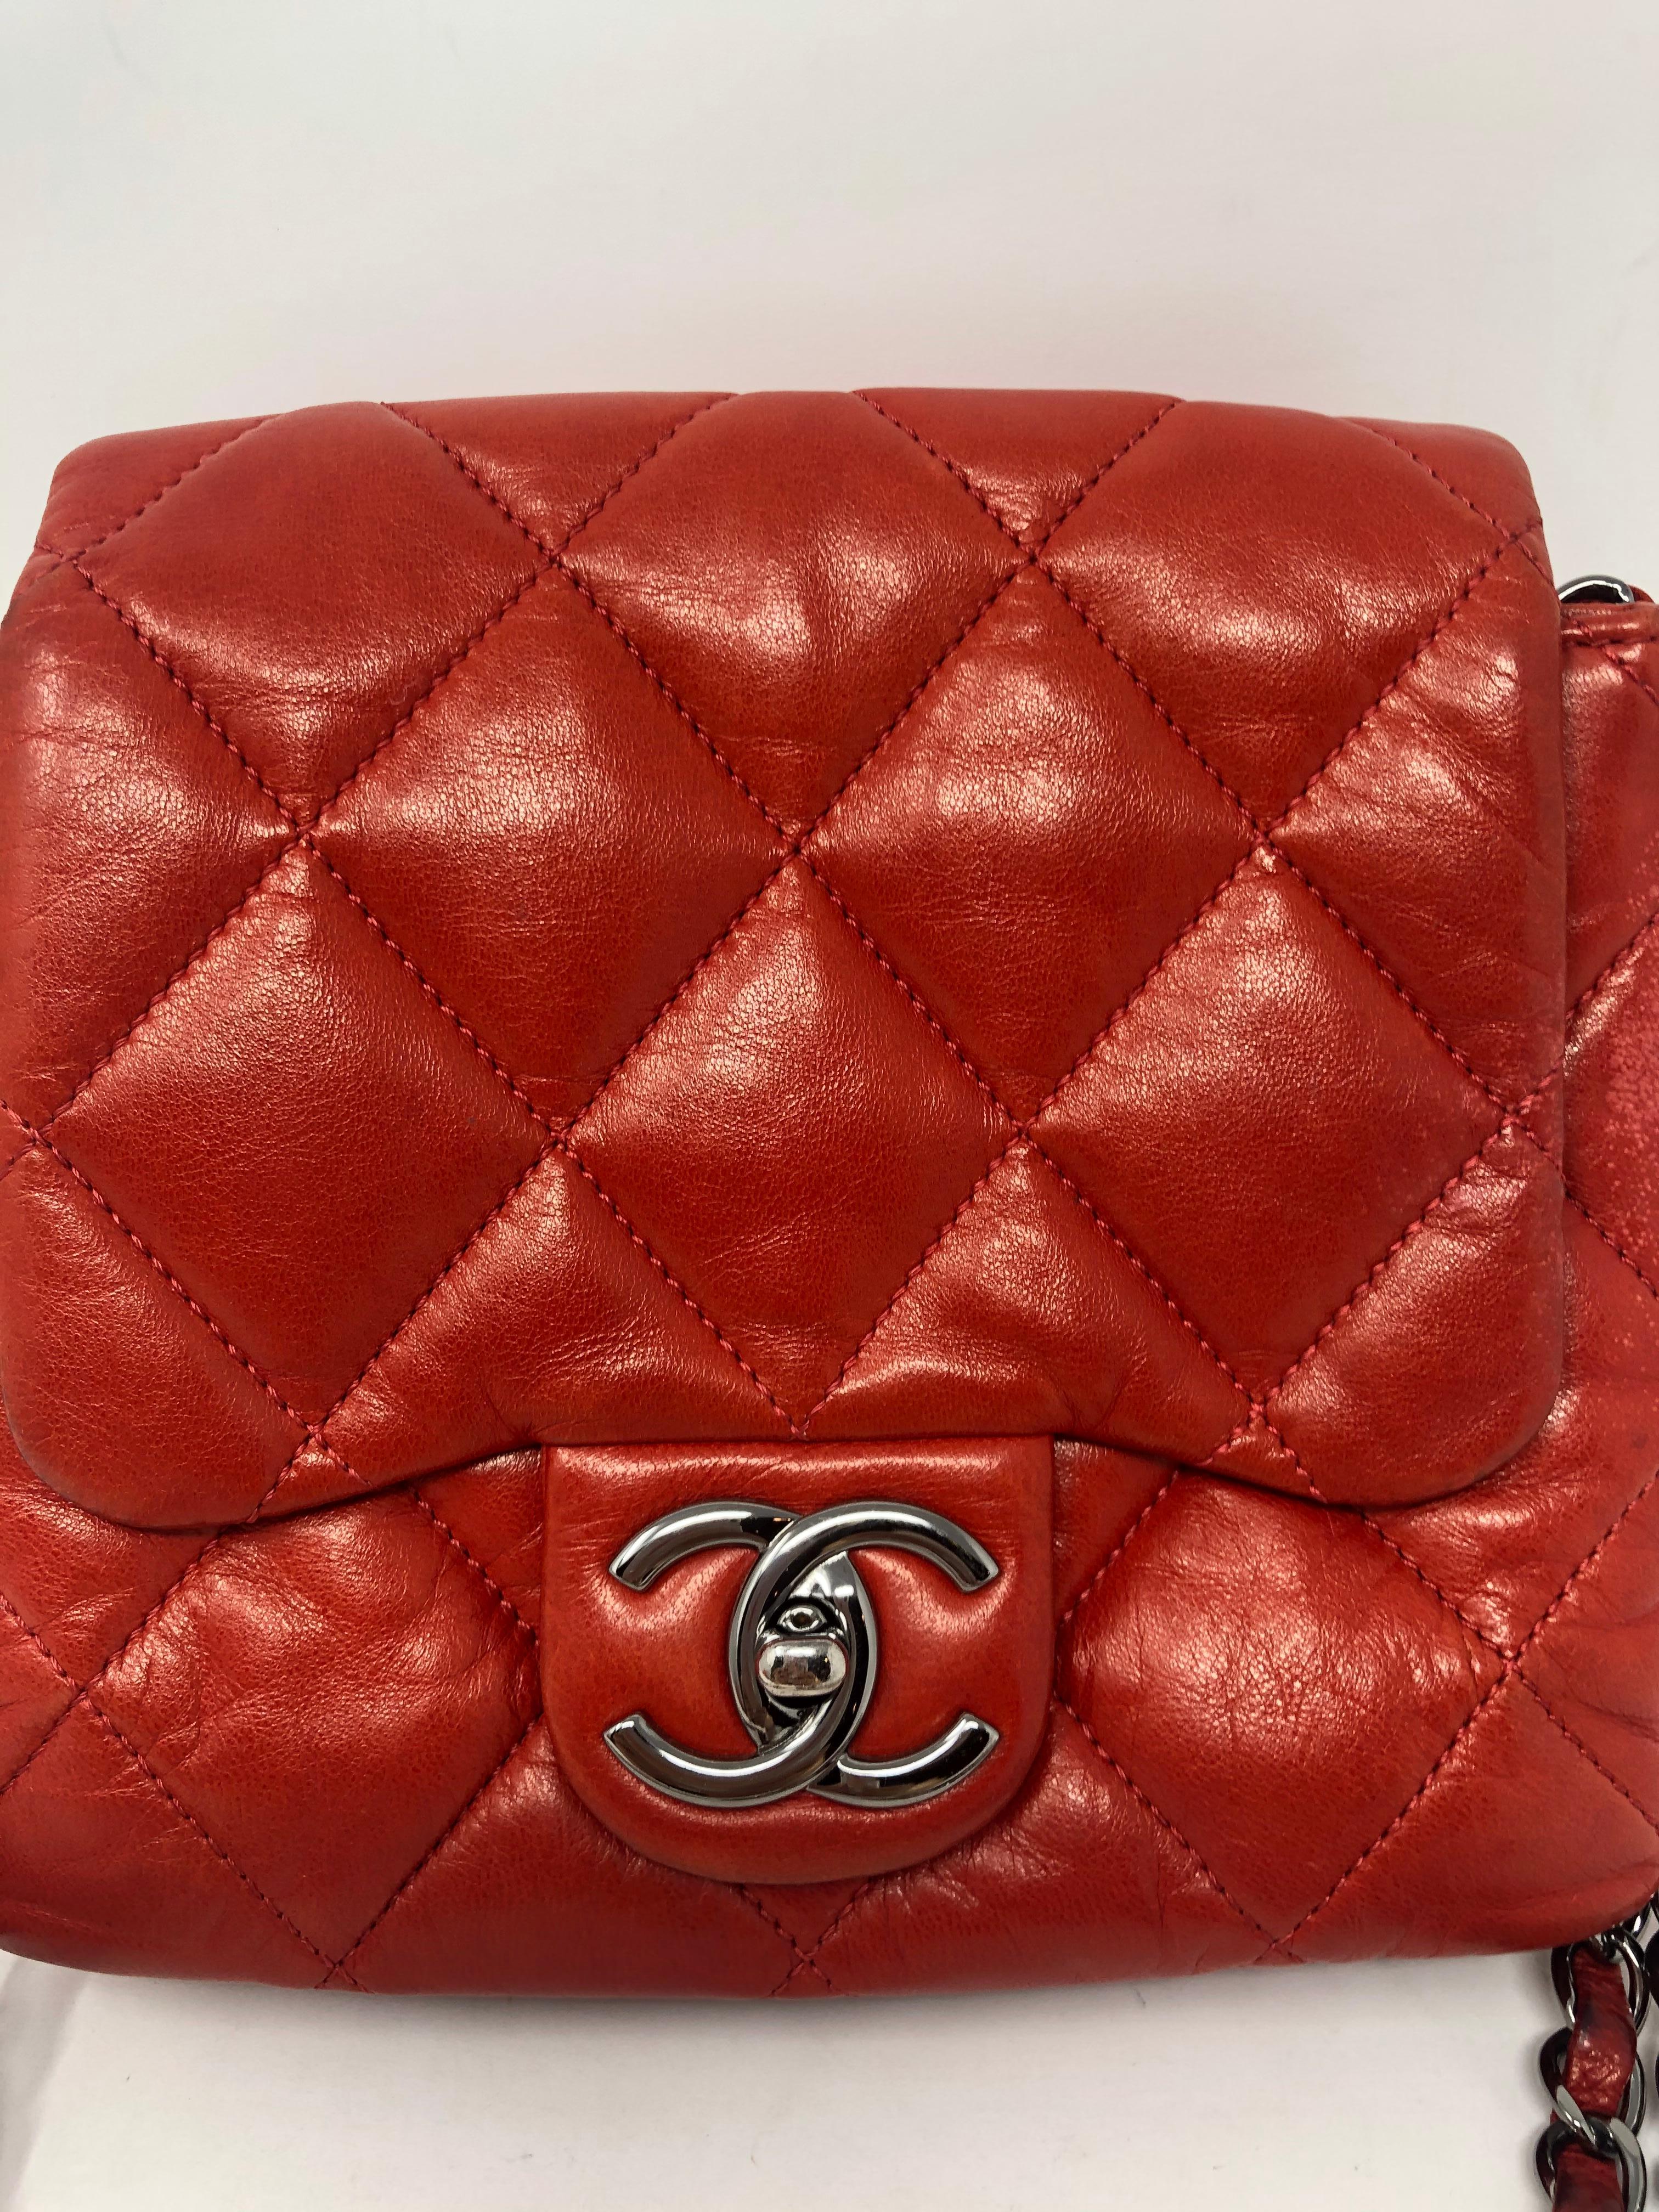 Chanel Red Square Shaped Leather Bag. Double strap leather chain can be worn crossbody. Soft red leather in fair condition. Has darkened in some spots from wear. Lots of life left. Slight rubbing on back. Please see photos. Not very noticeable. Mini